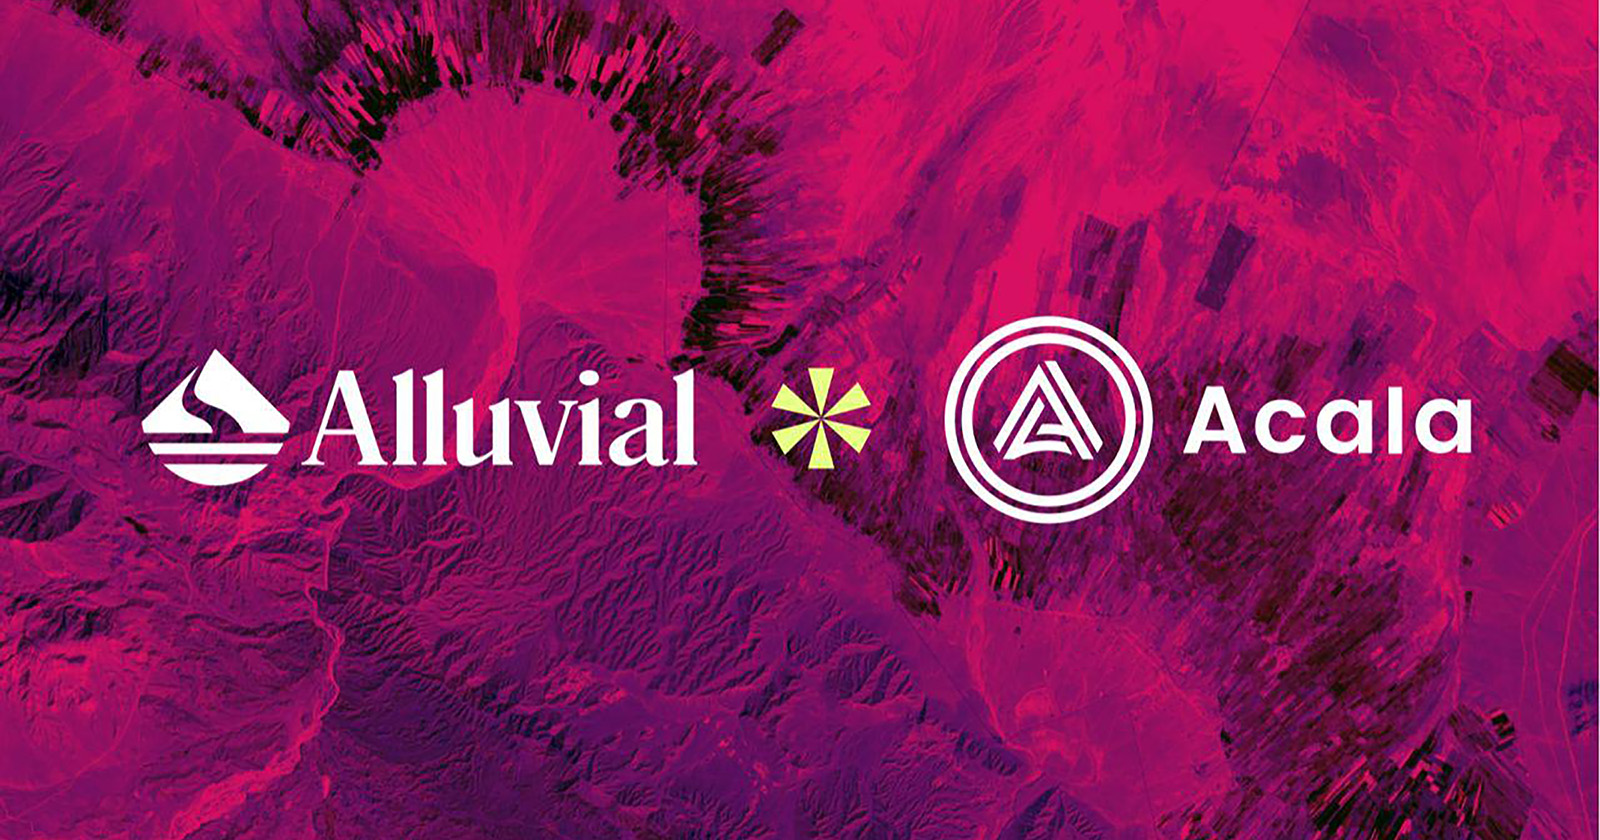 Acala Foundation Joins Alluvial to Provide a Compliant, Enterprise-Grade Polkadot (DOT) Liquid Staking Product to Institutions